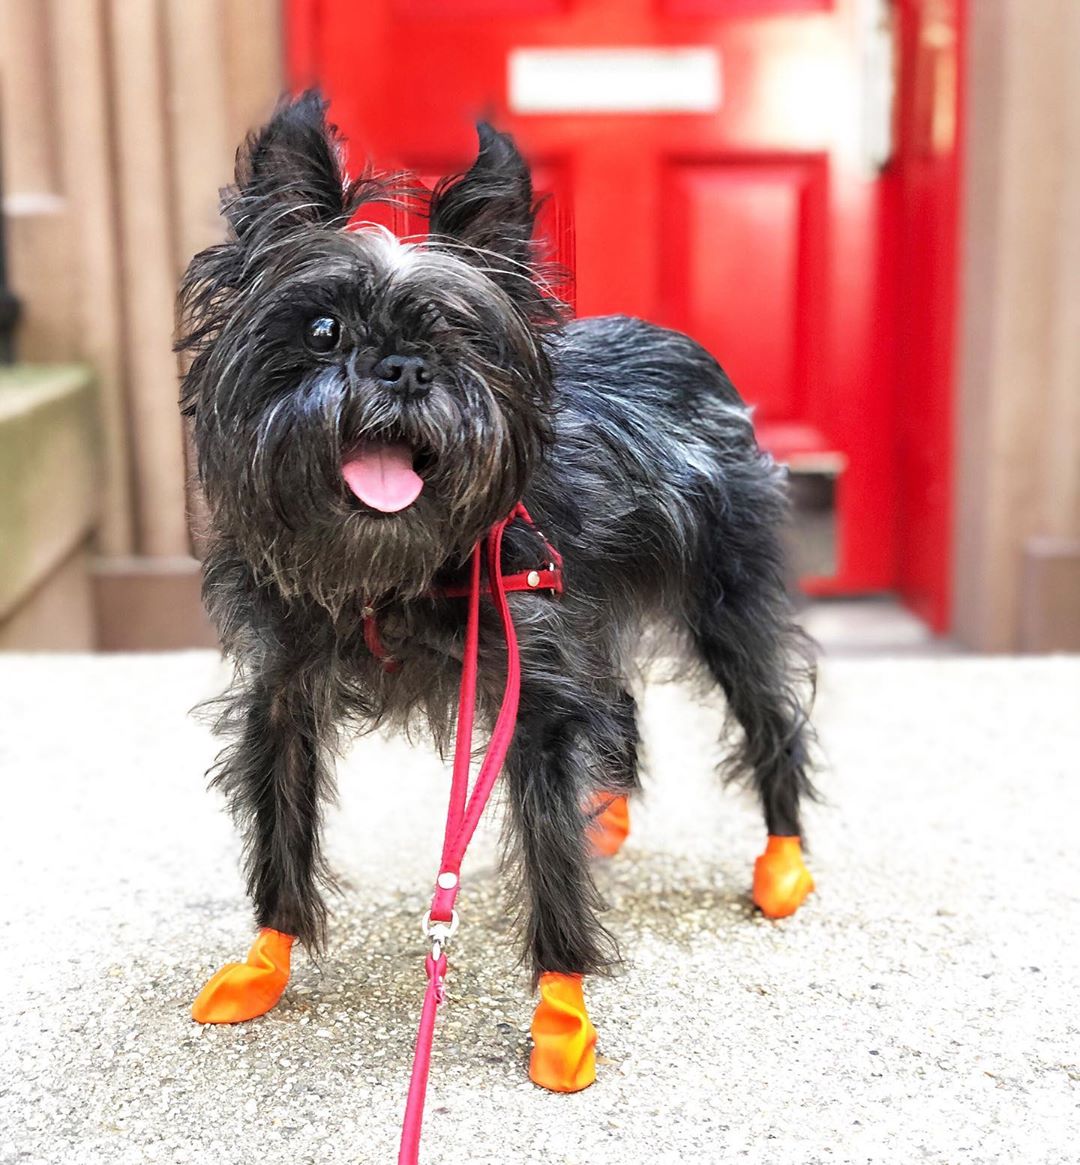 A Affenpinscher wearing shoes while standing on the countertop